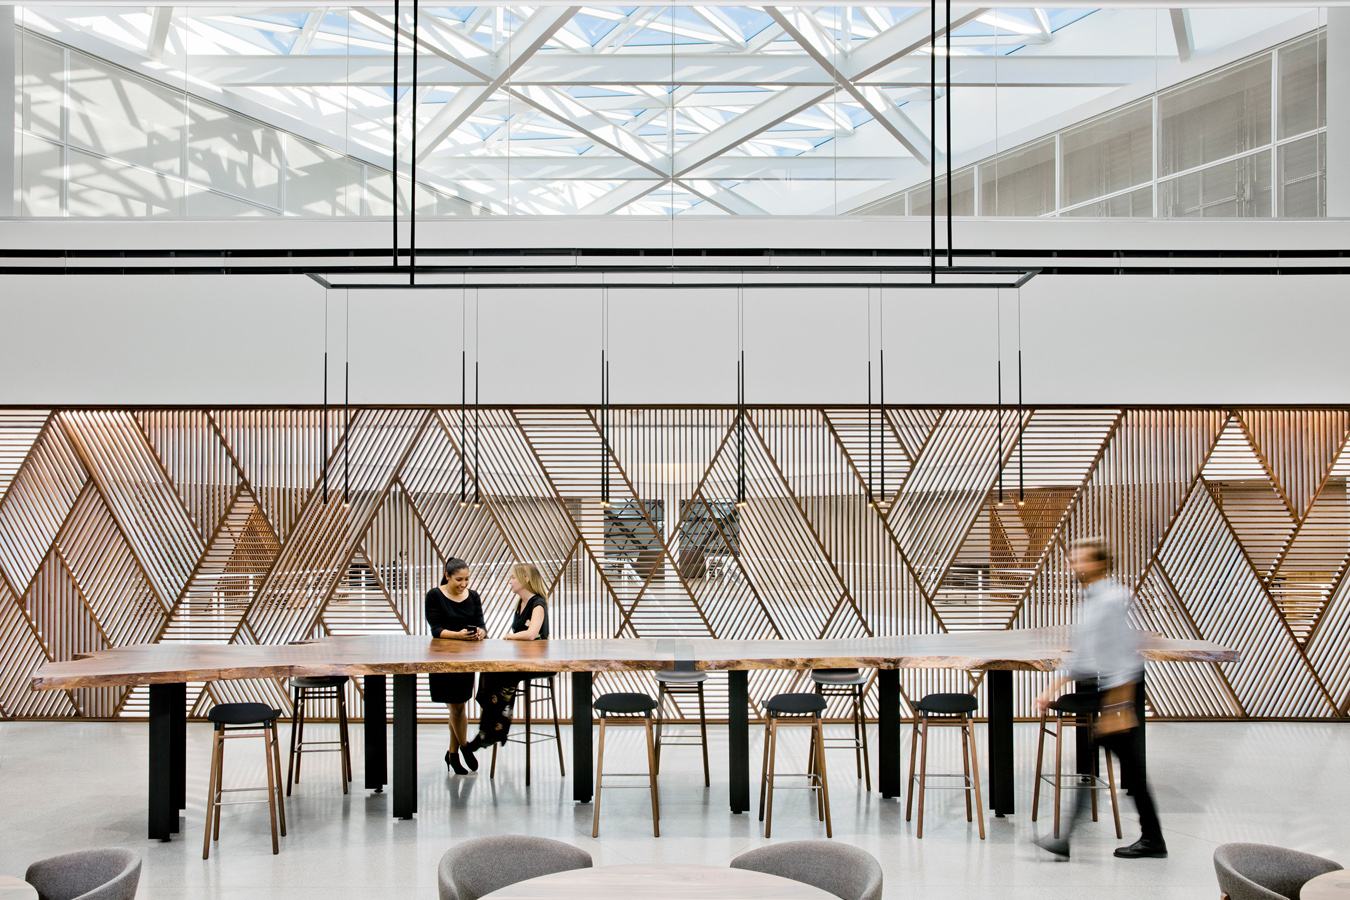 Winners announced: Interior Awards 2019 | Architecture Now